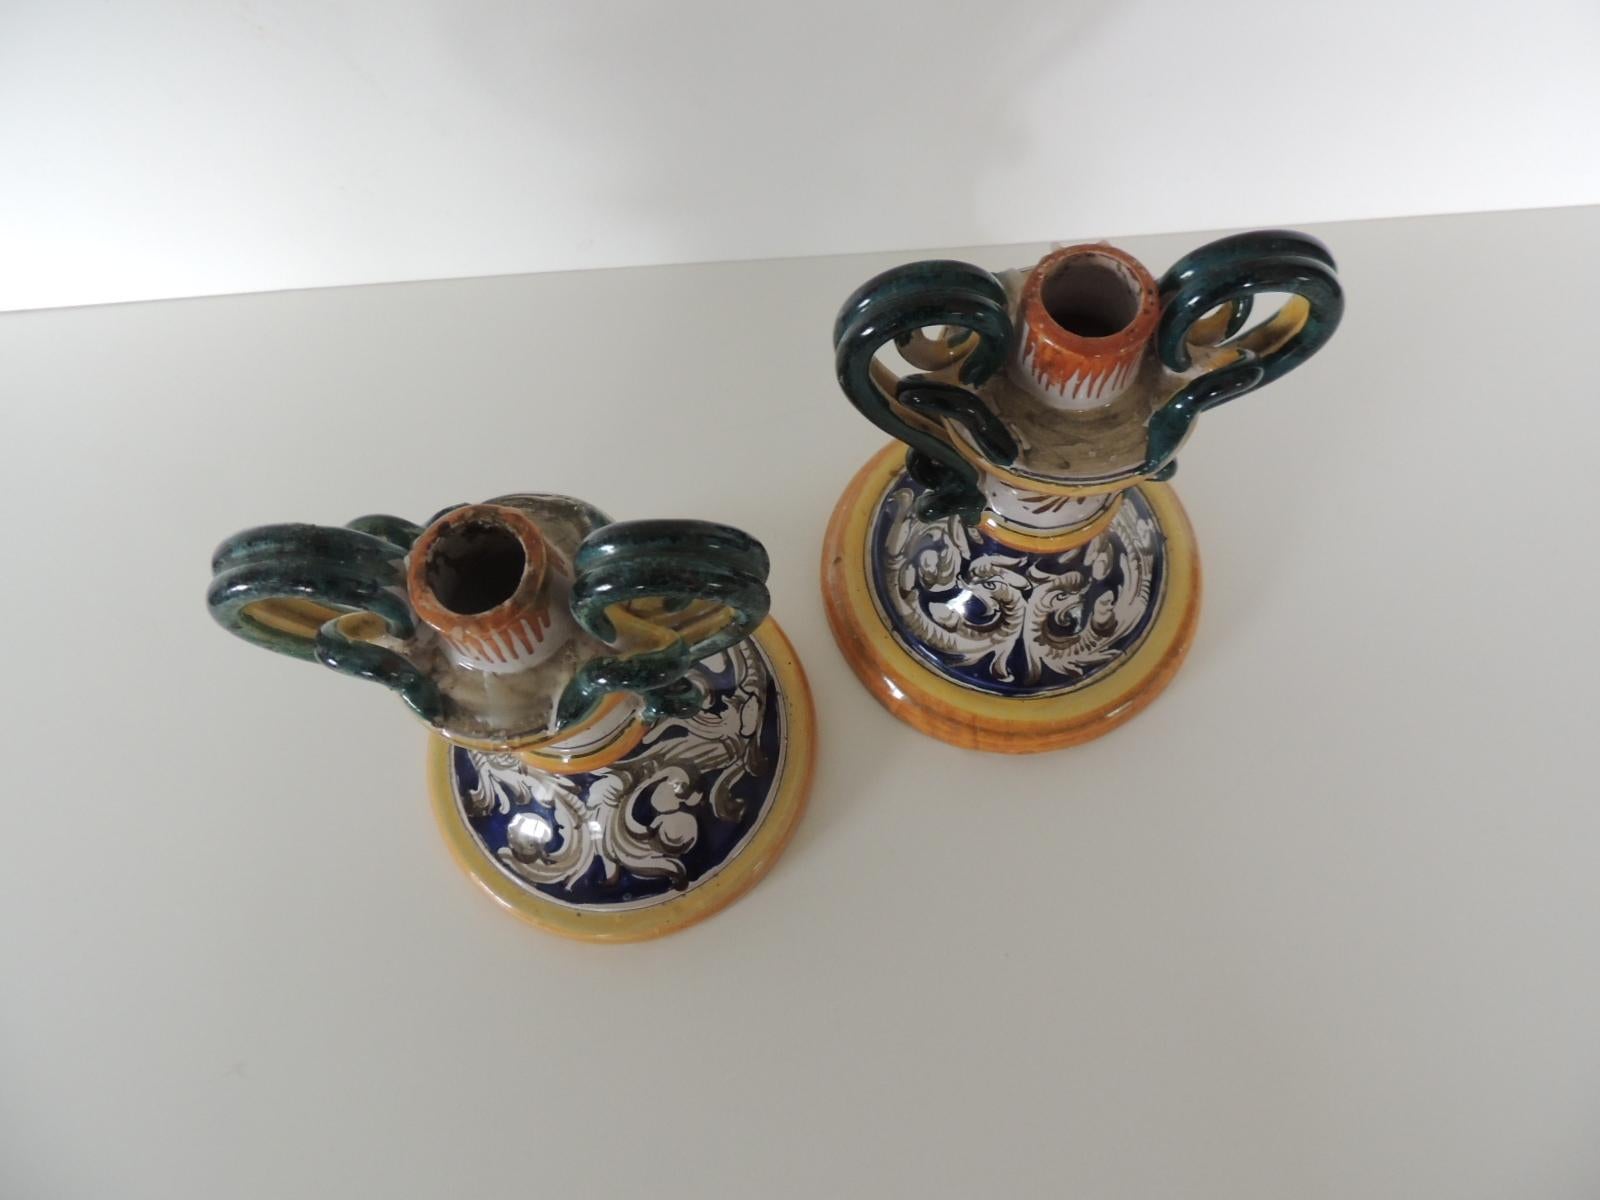 Pair of Italian Majolica hand painted candleholders.
Round base candleholders depicting dolphins in shades of white, yellow, green, royal blue and white.
Stamped: Made in Italy.
Size: 6.3/4